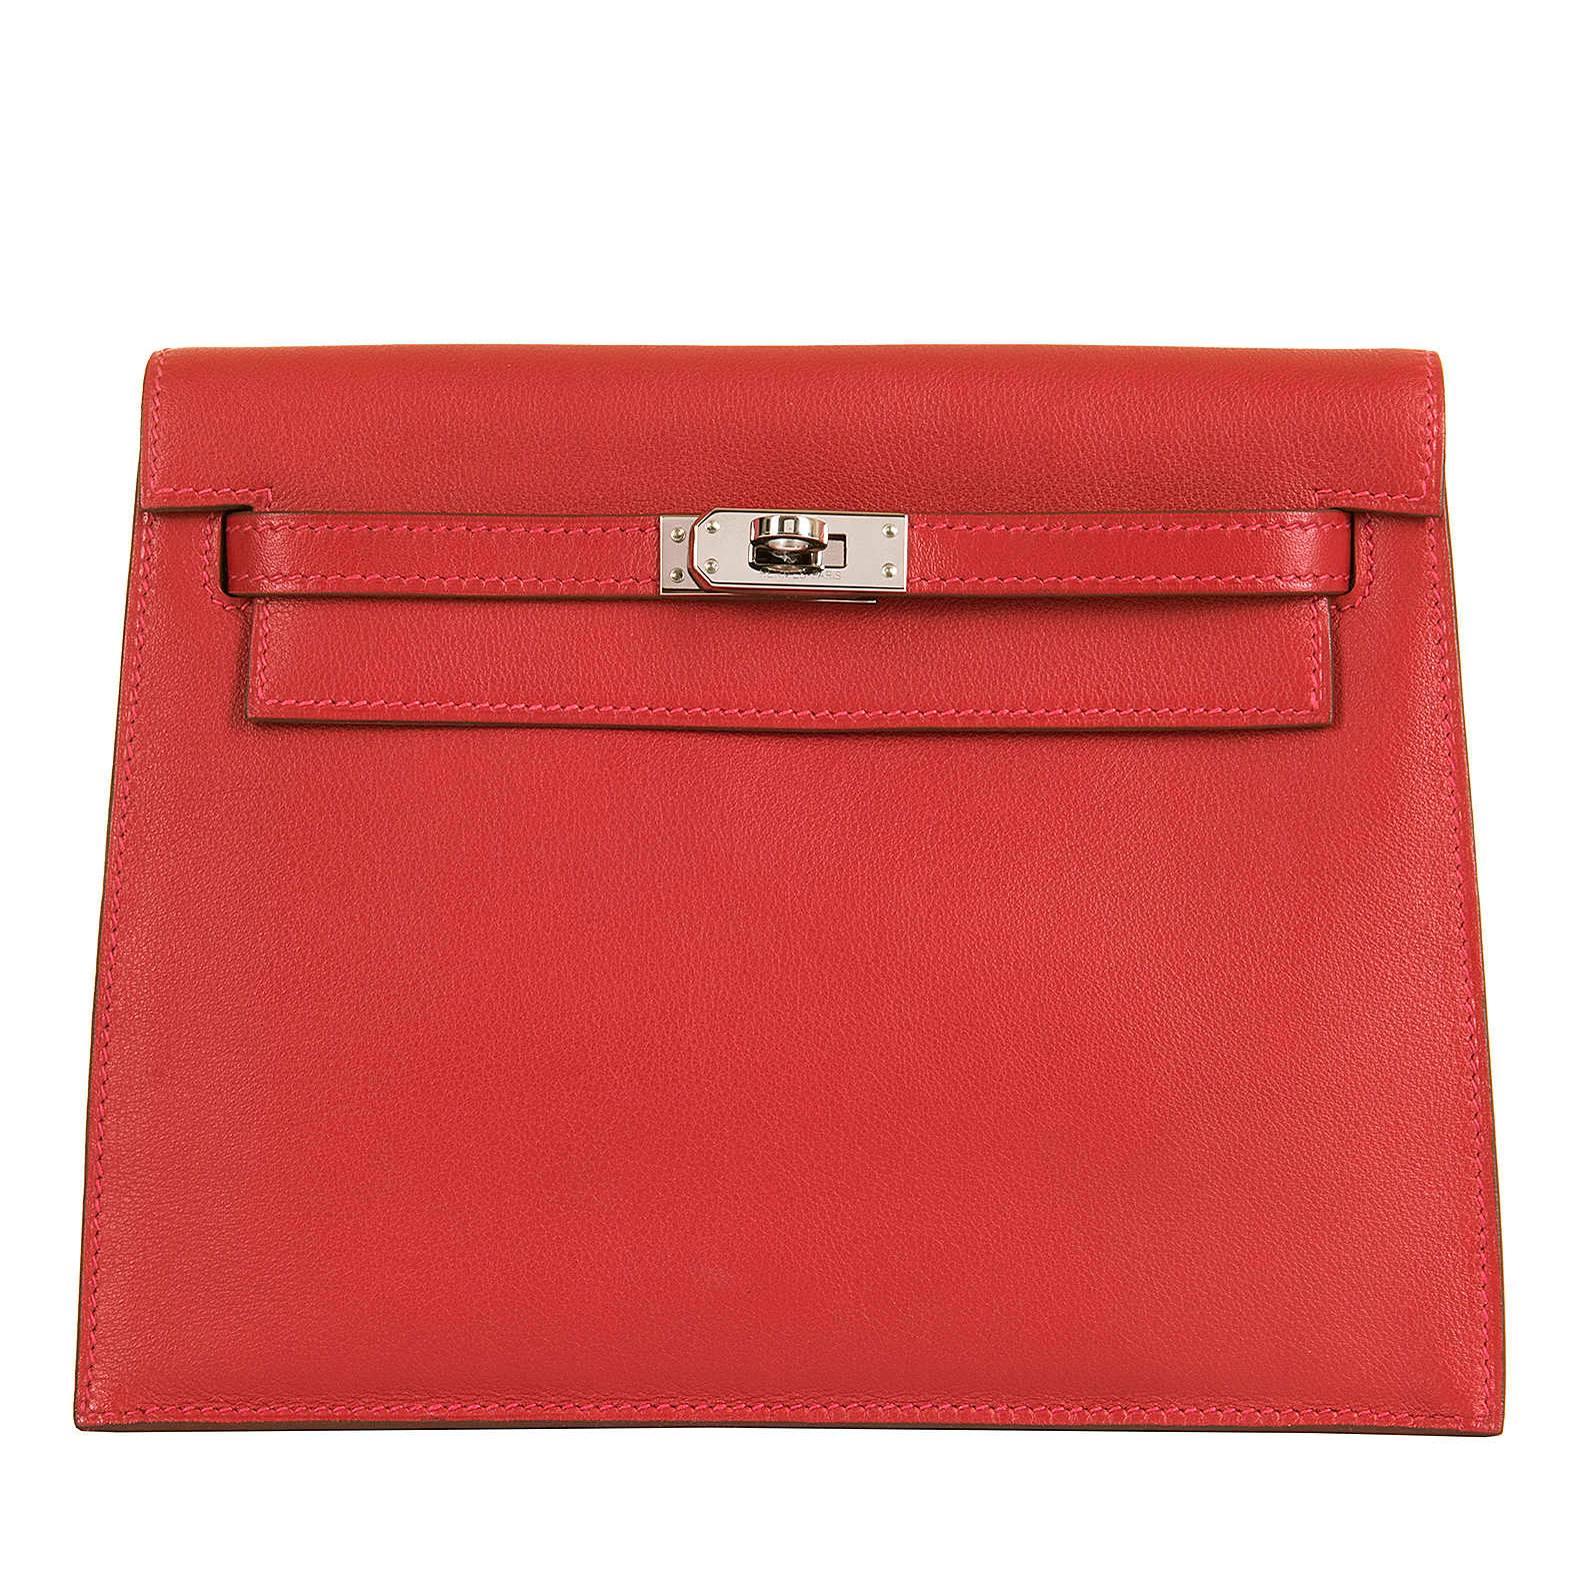 RARE & PRISTINE Hermes Danse Kelly Bag in Swift Leather with Palladium Hardware For Sale